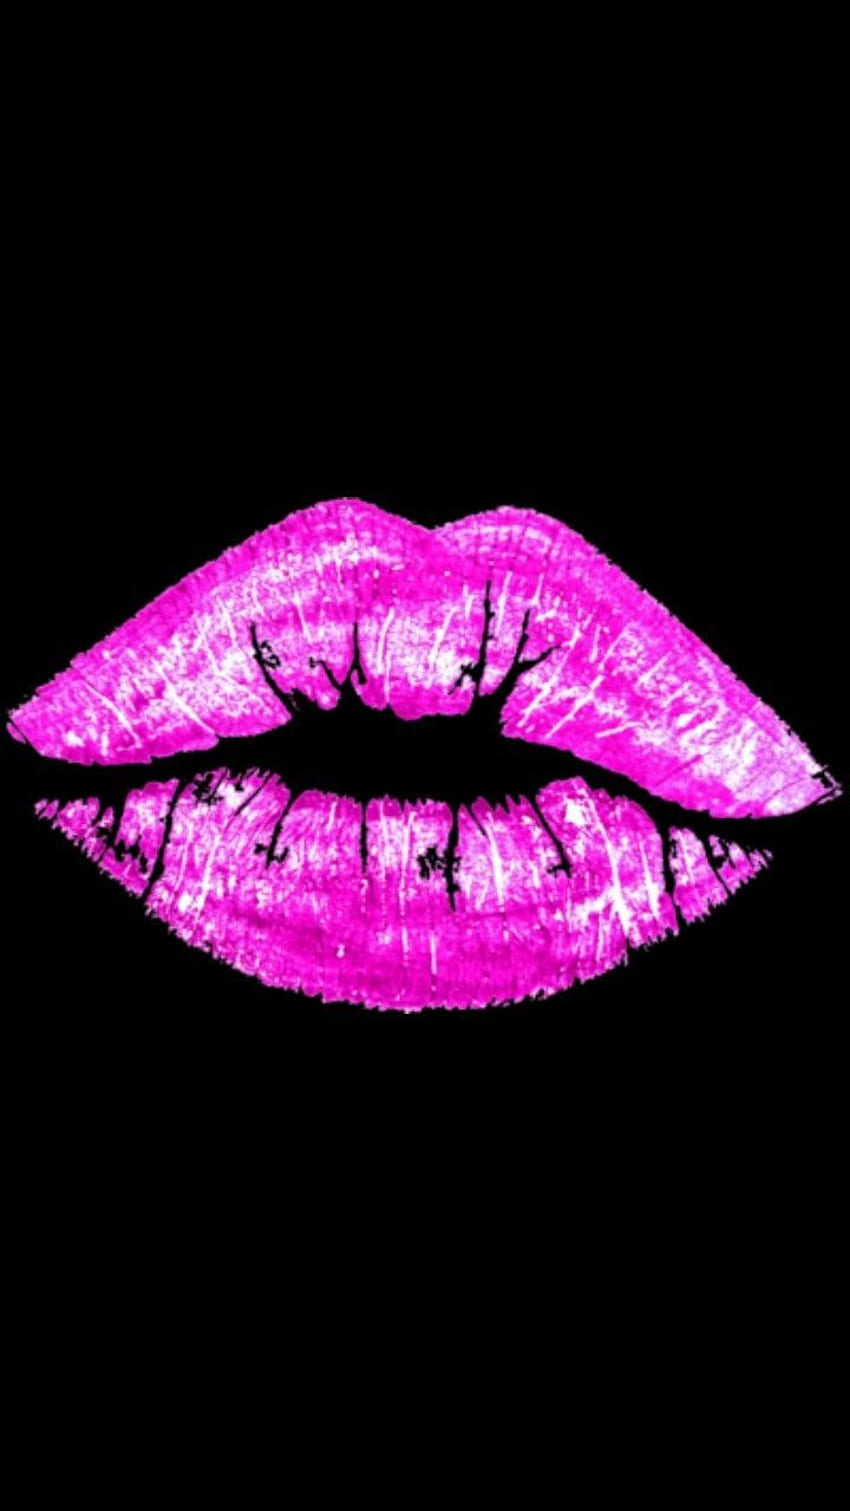 Neon Lips Wallpapers - Top Free Neon Lips Backgrounds - WallpaperAccess